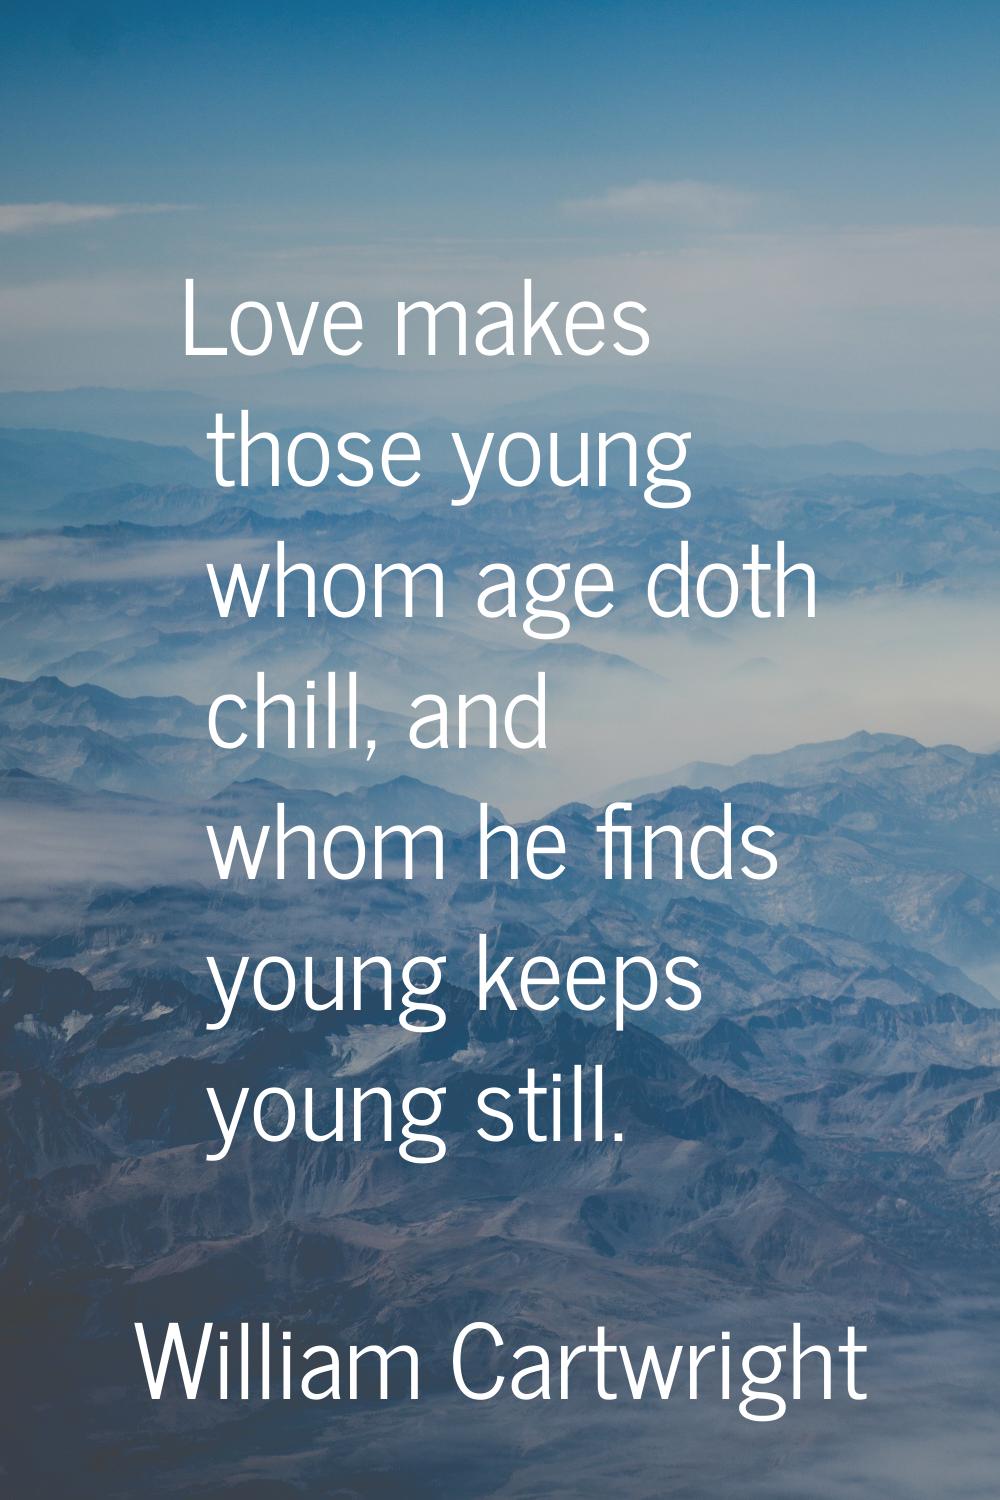 Love makes those young whom age doth chill, and whom he finds young keeps young still.